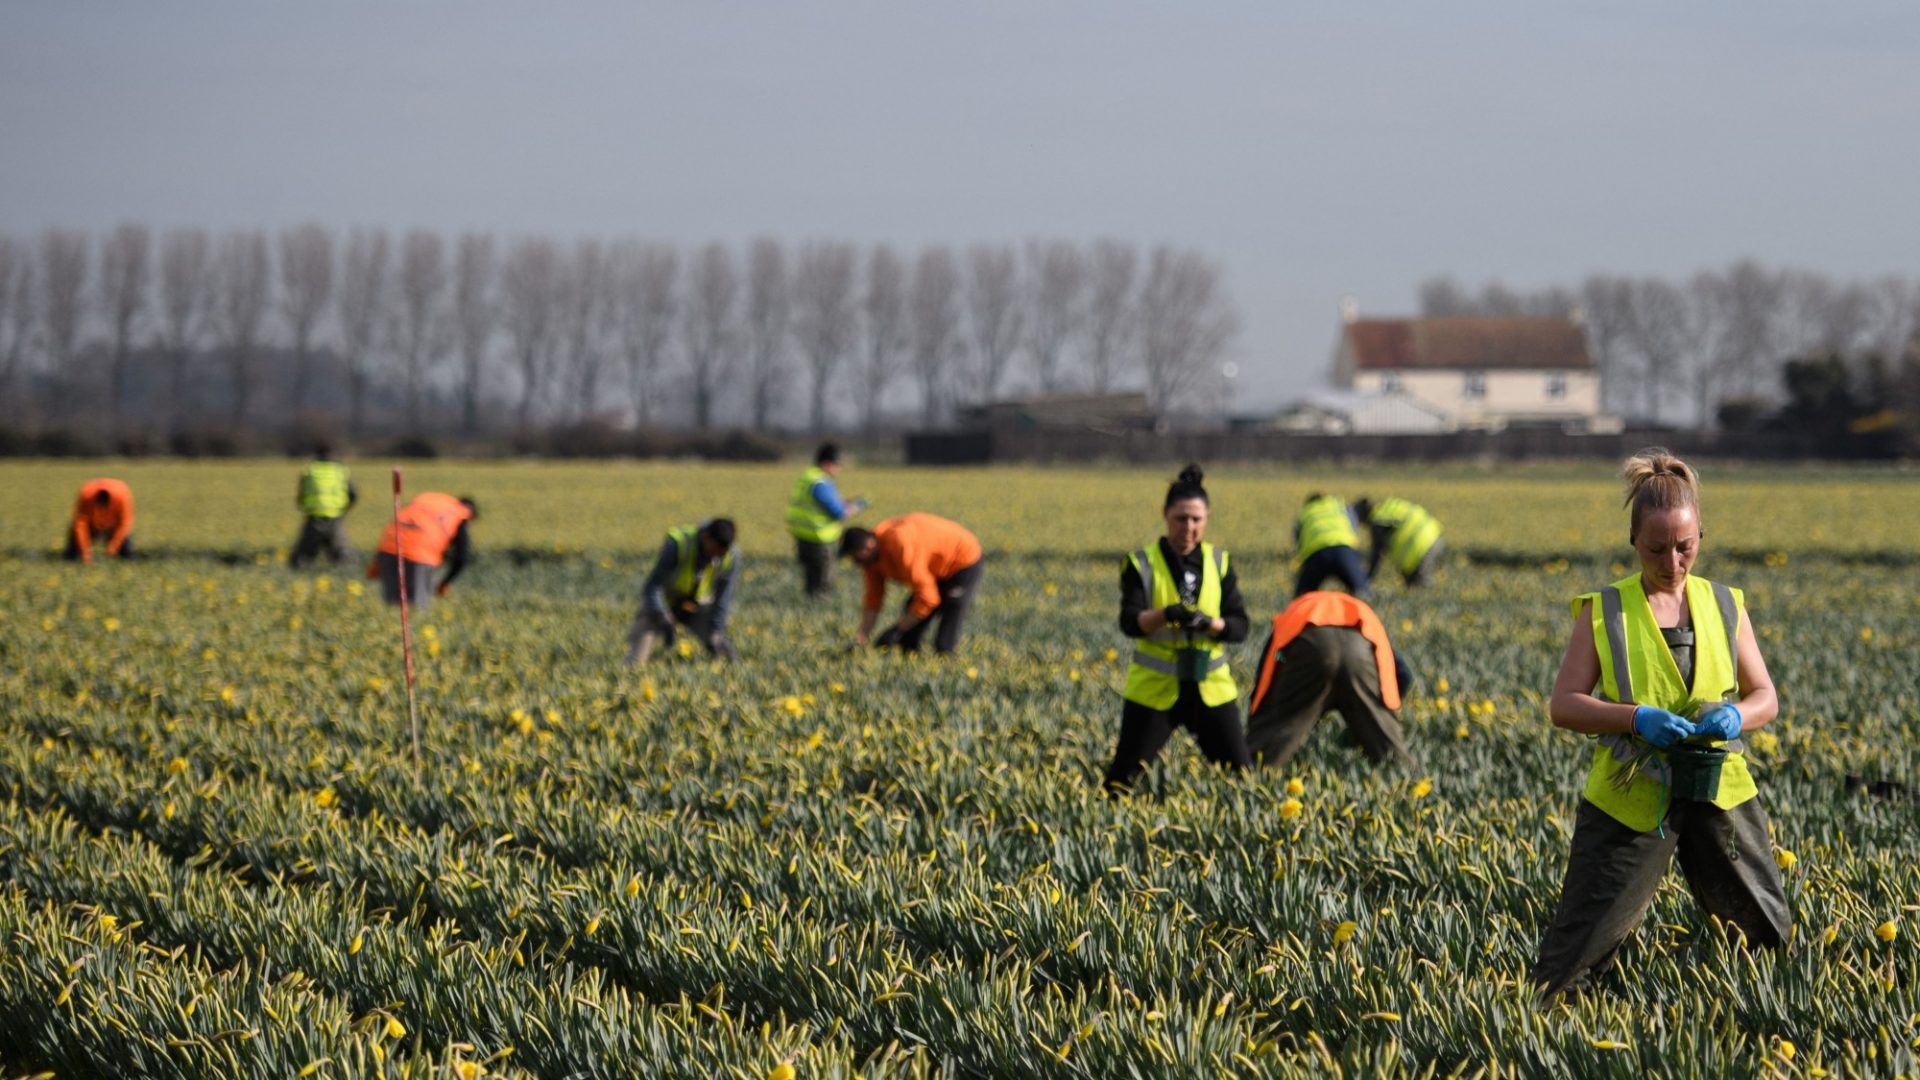 Migrant workers from Romania harvest daffodils in Lincolnshire. The UK needs immigration but the Tories’ latest plans are based on appeasing the far right, not what is best for the country. Photo: Oli Scarff/AFP/Getty